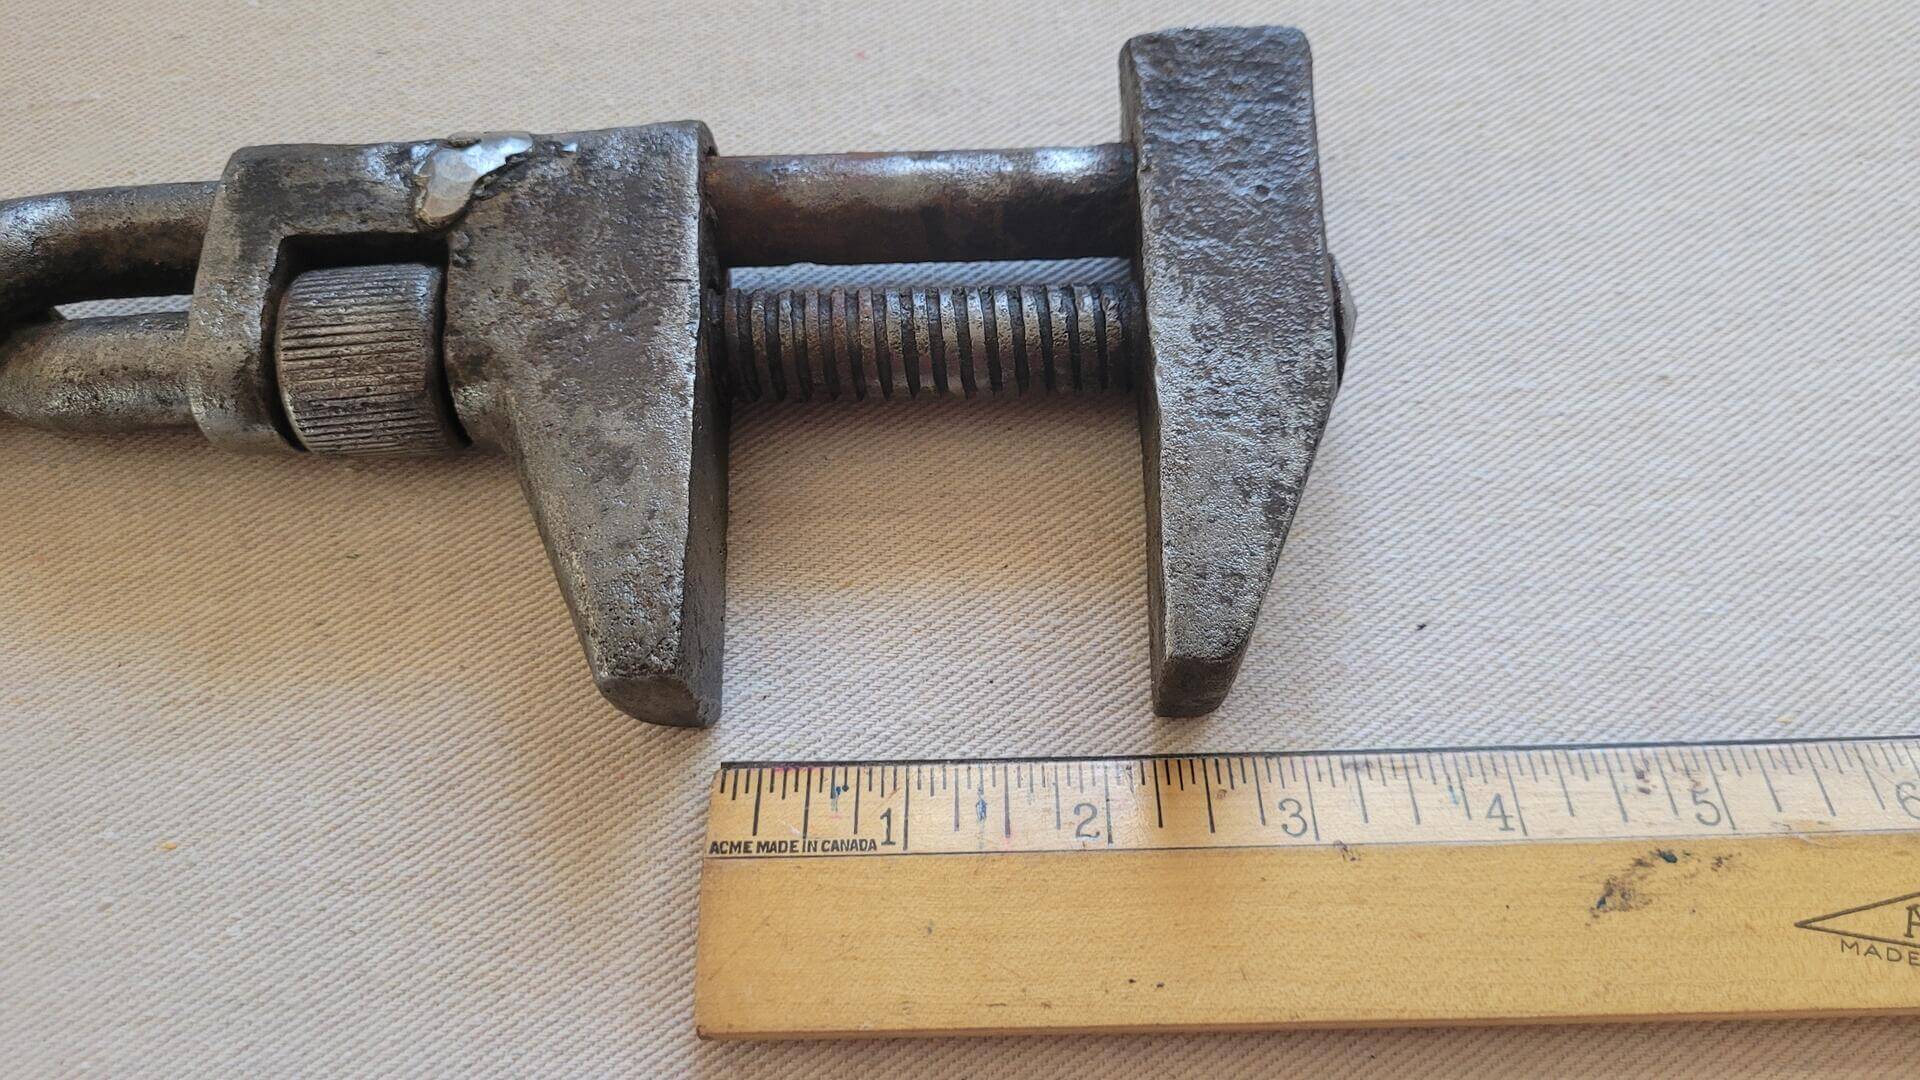 Primitive Acme twist handle adjustable plumbing monkey wrench 14 inches in length and 2 1/4 jaw by rederick H. Seymour Pat. No. 273,170. Antique made in USA collectible tools